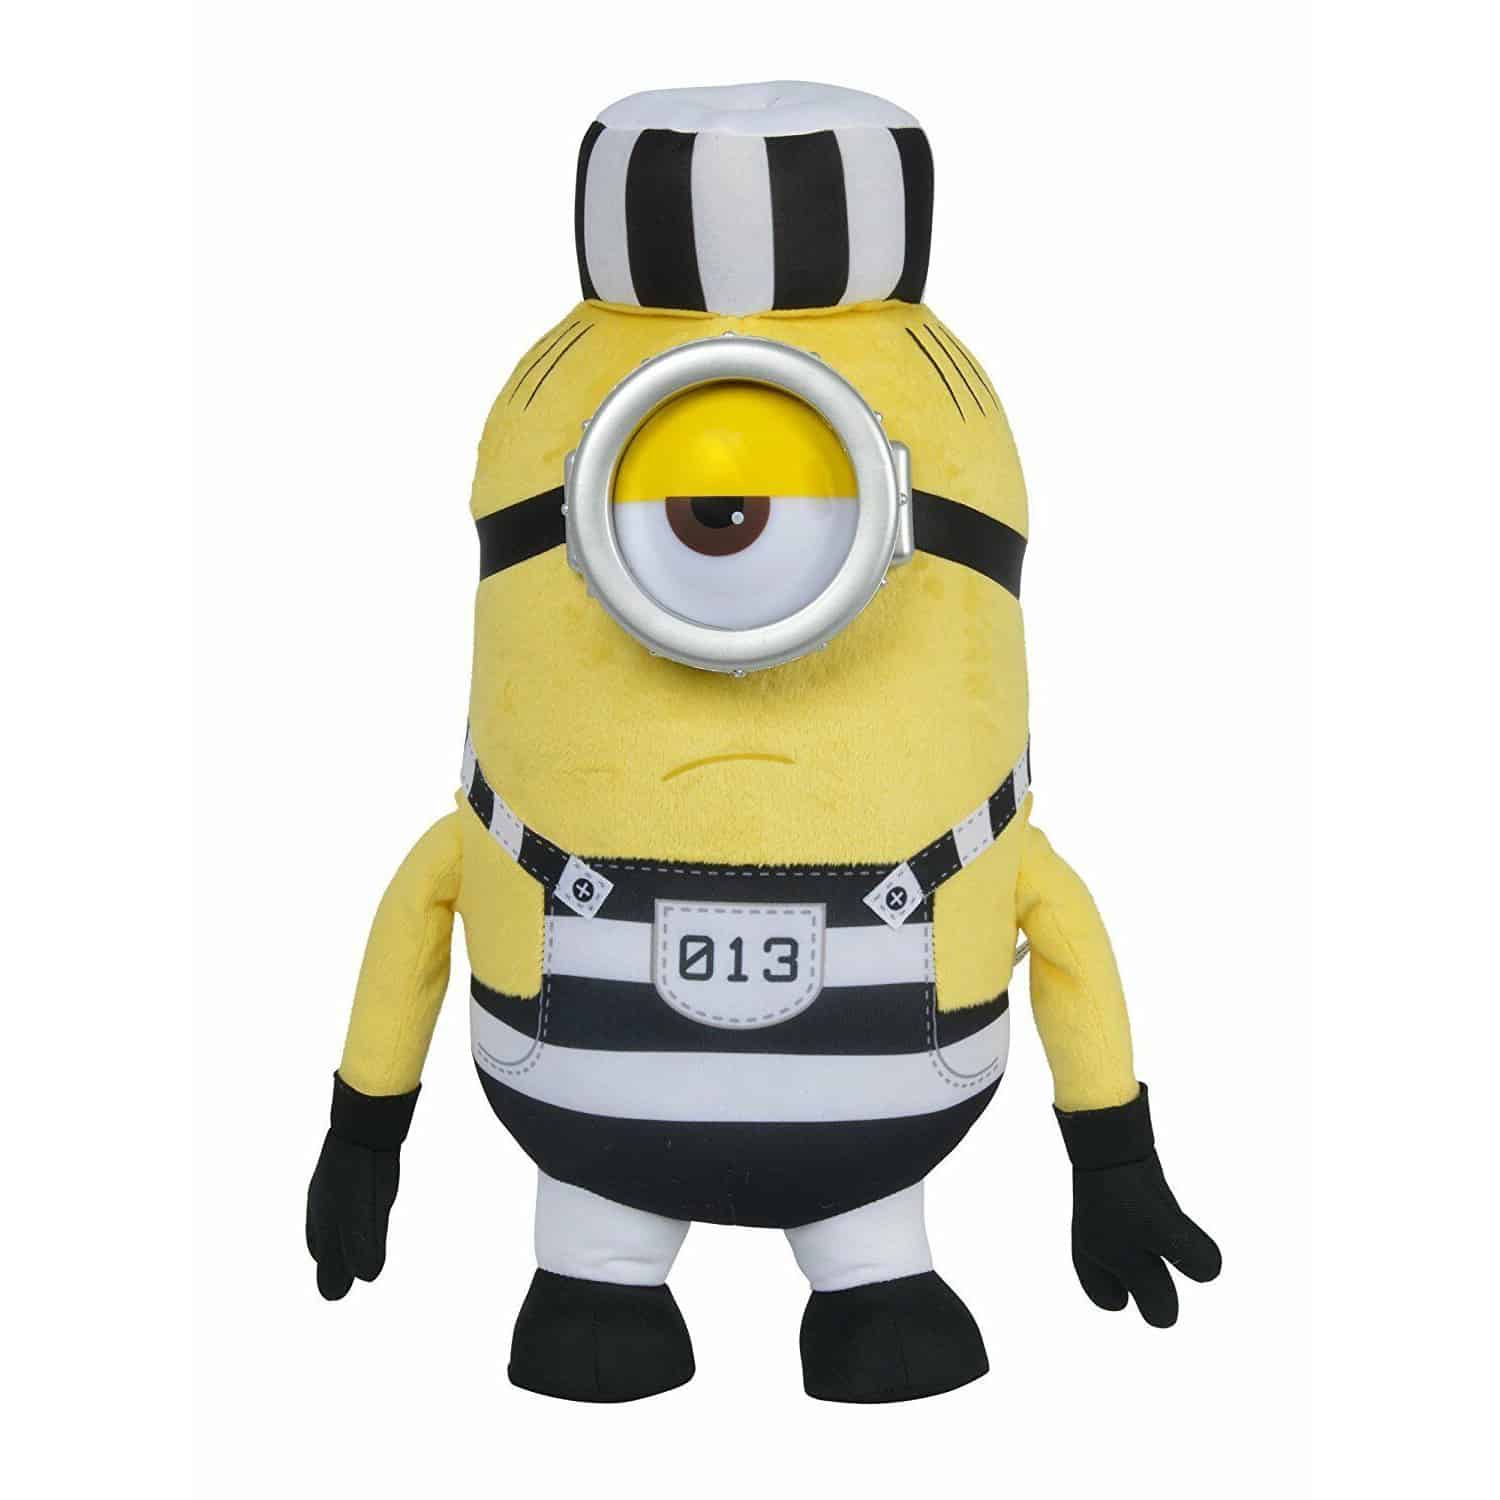 Despicable Me 3 Plush Bears and Toys 